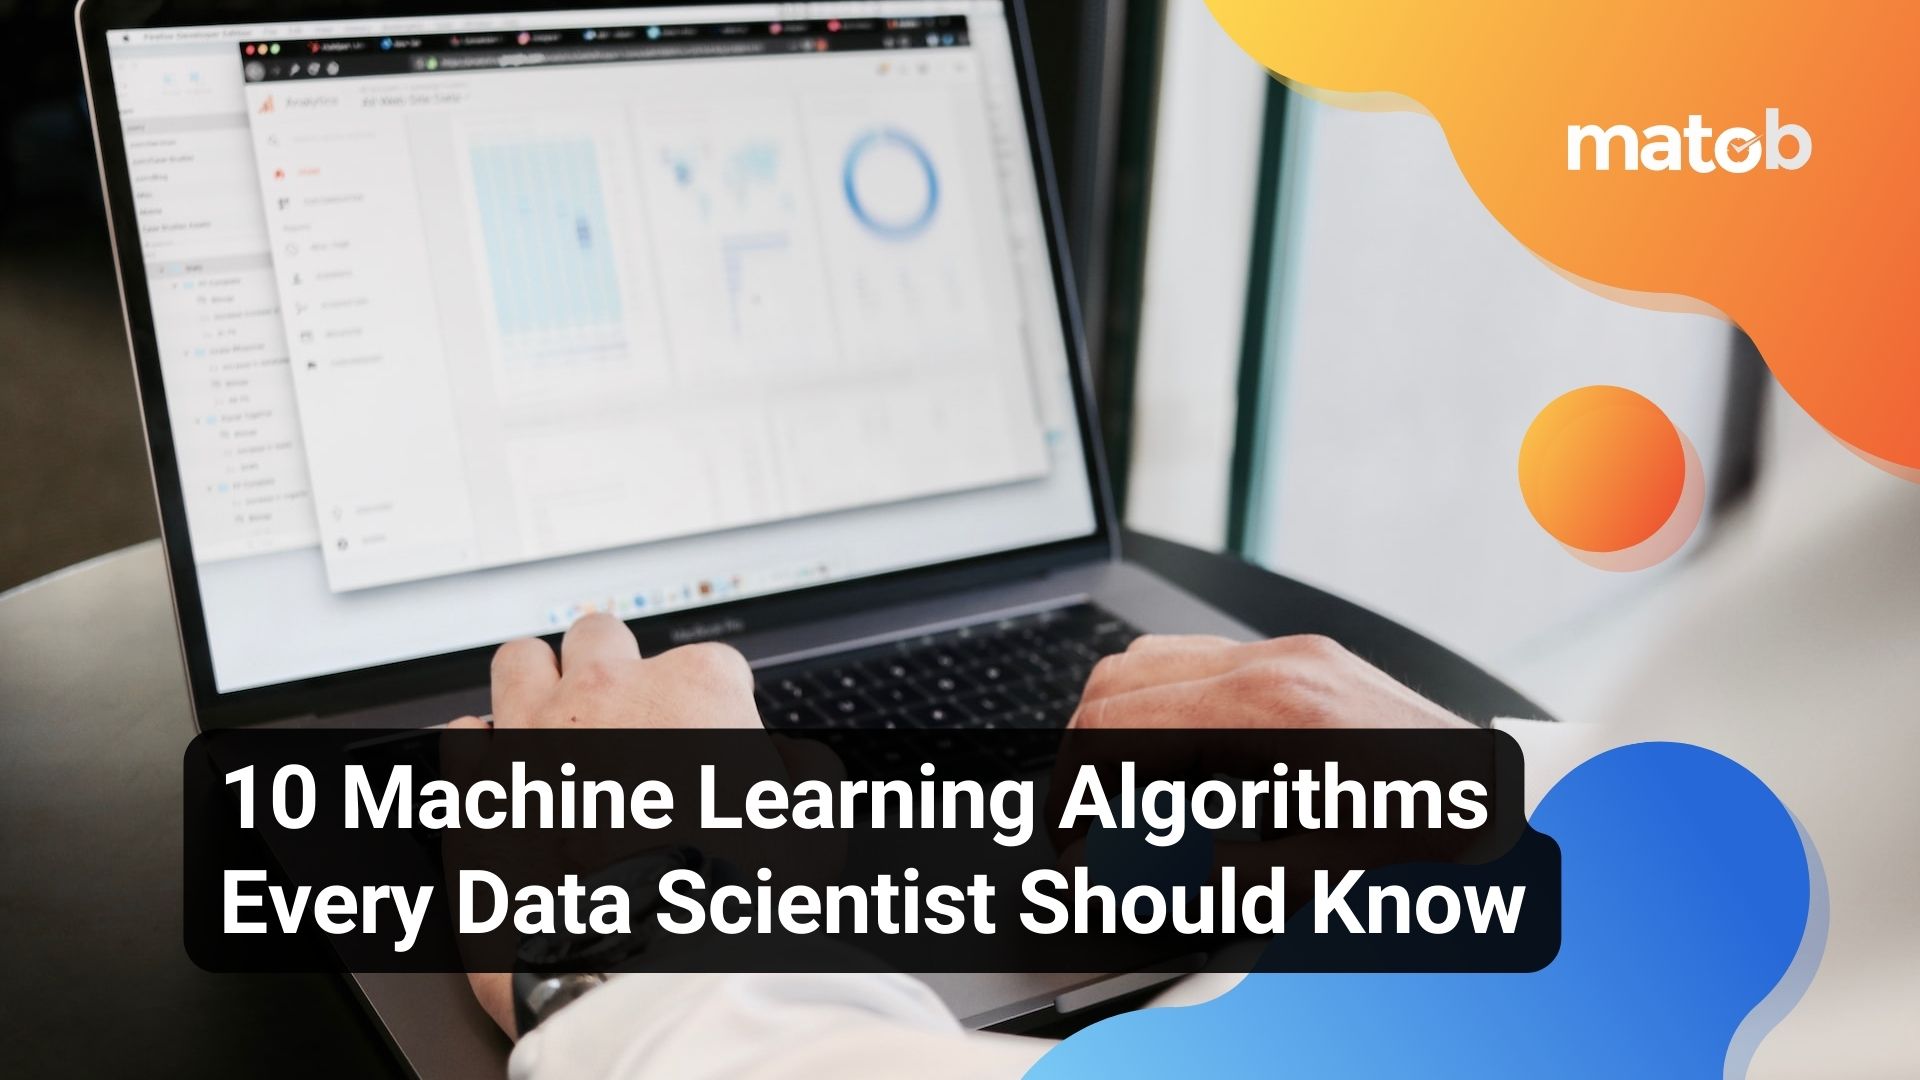 10 Machine Learning Algorithms Every Data Scientist Should Know